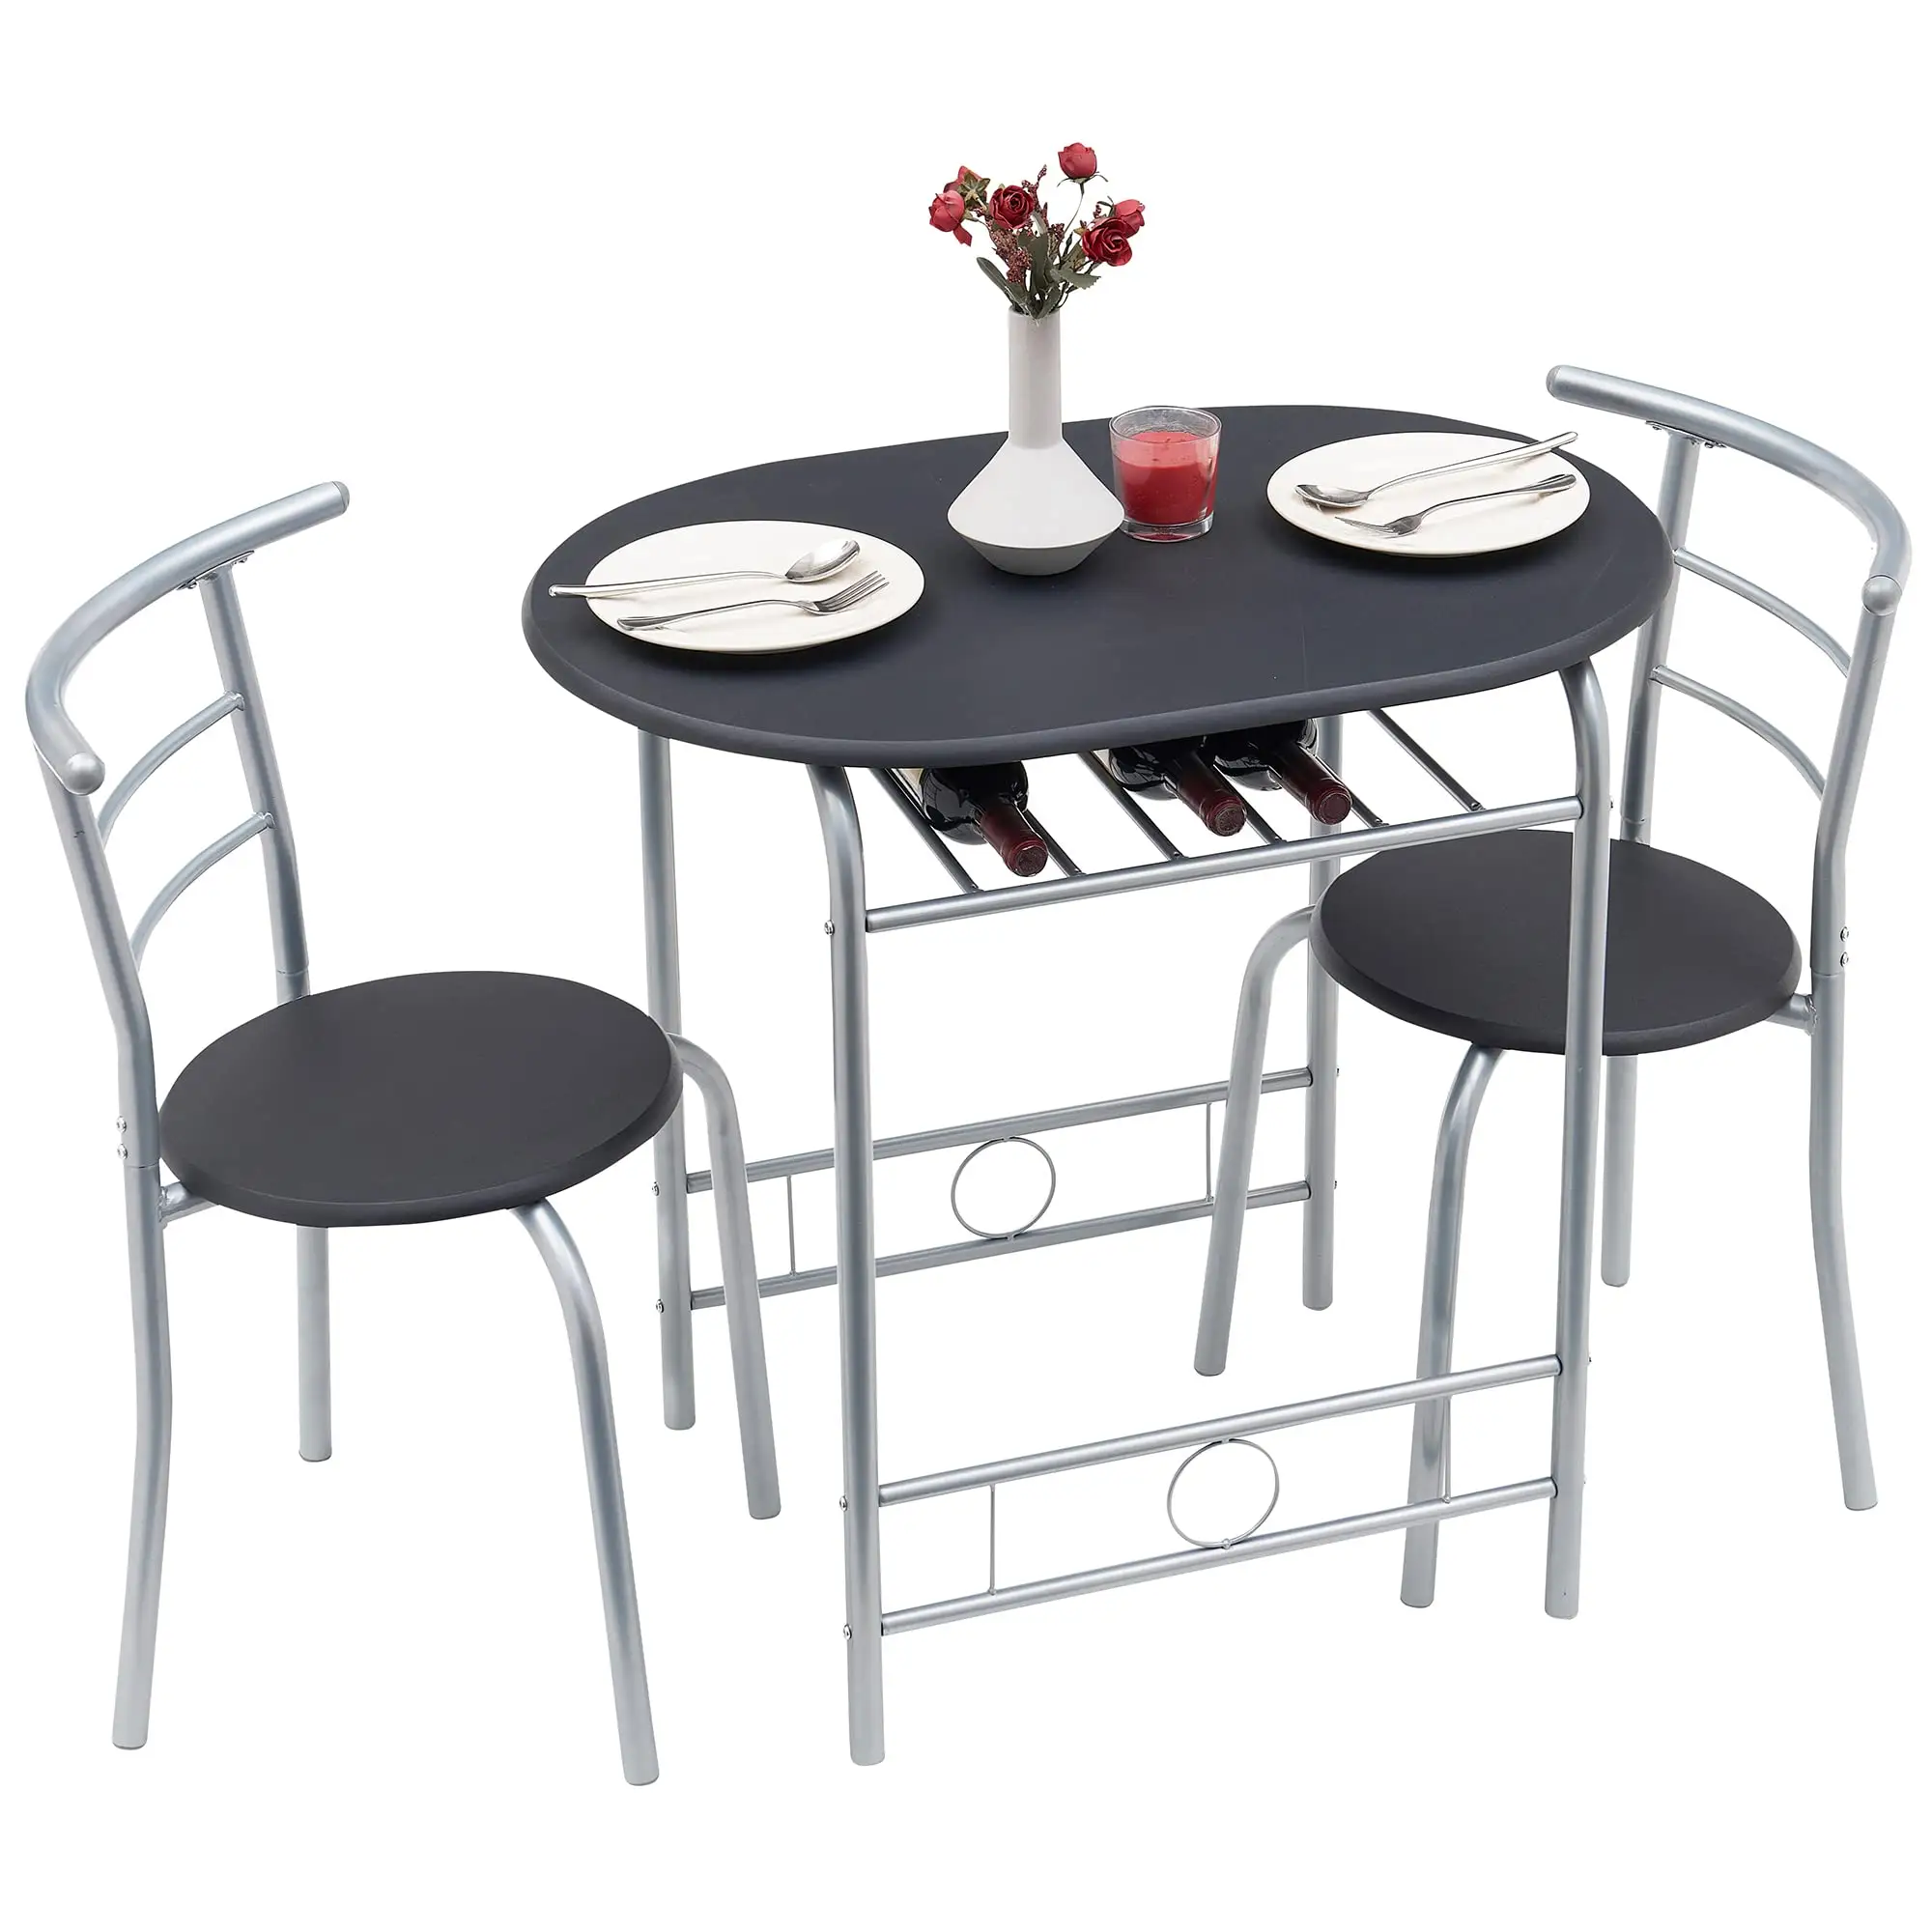 3 Piece Wood Round Table & Chair Set for Dining Room Kitchen Bar Breakfast, with Wine Storage Rack Space Saving, 31.5" Black